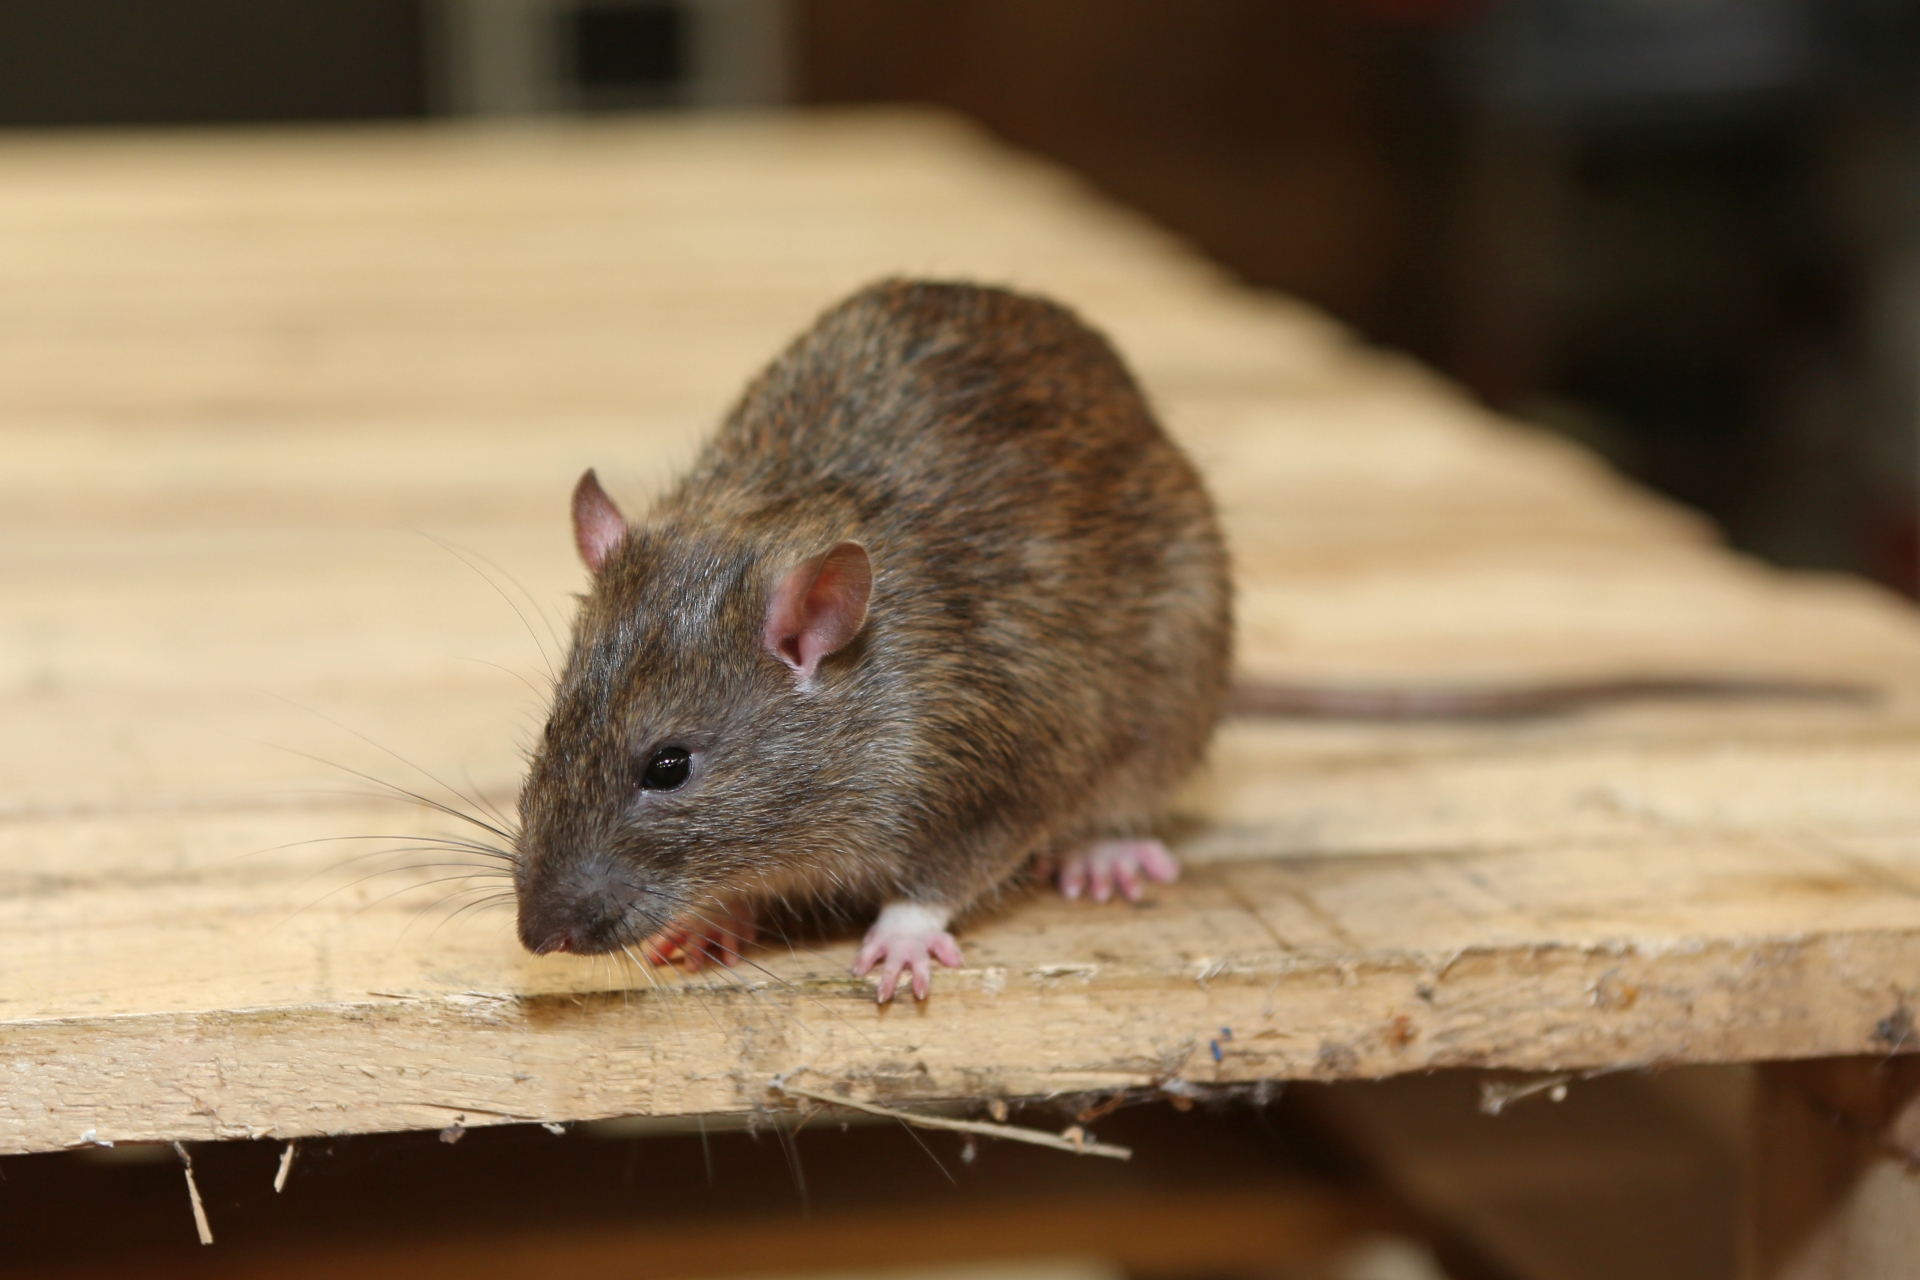 Rat extermination, Pest Control in Chessington, Hook, KT9. Call Now 020 8166 9746